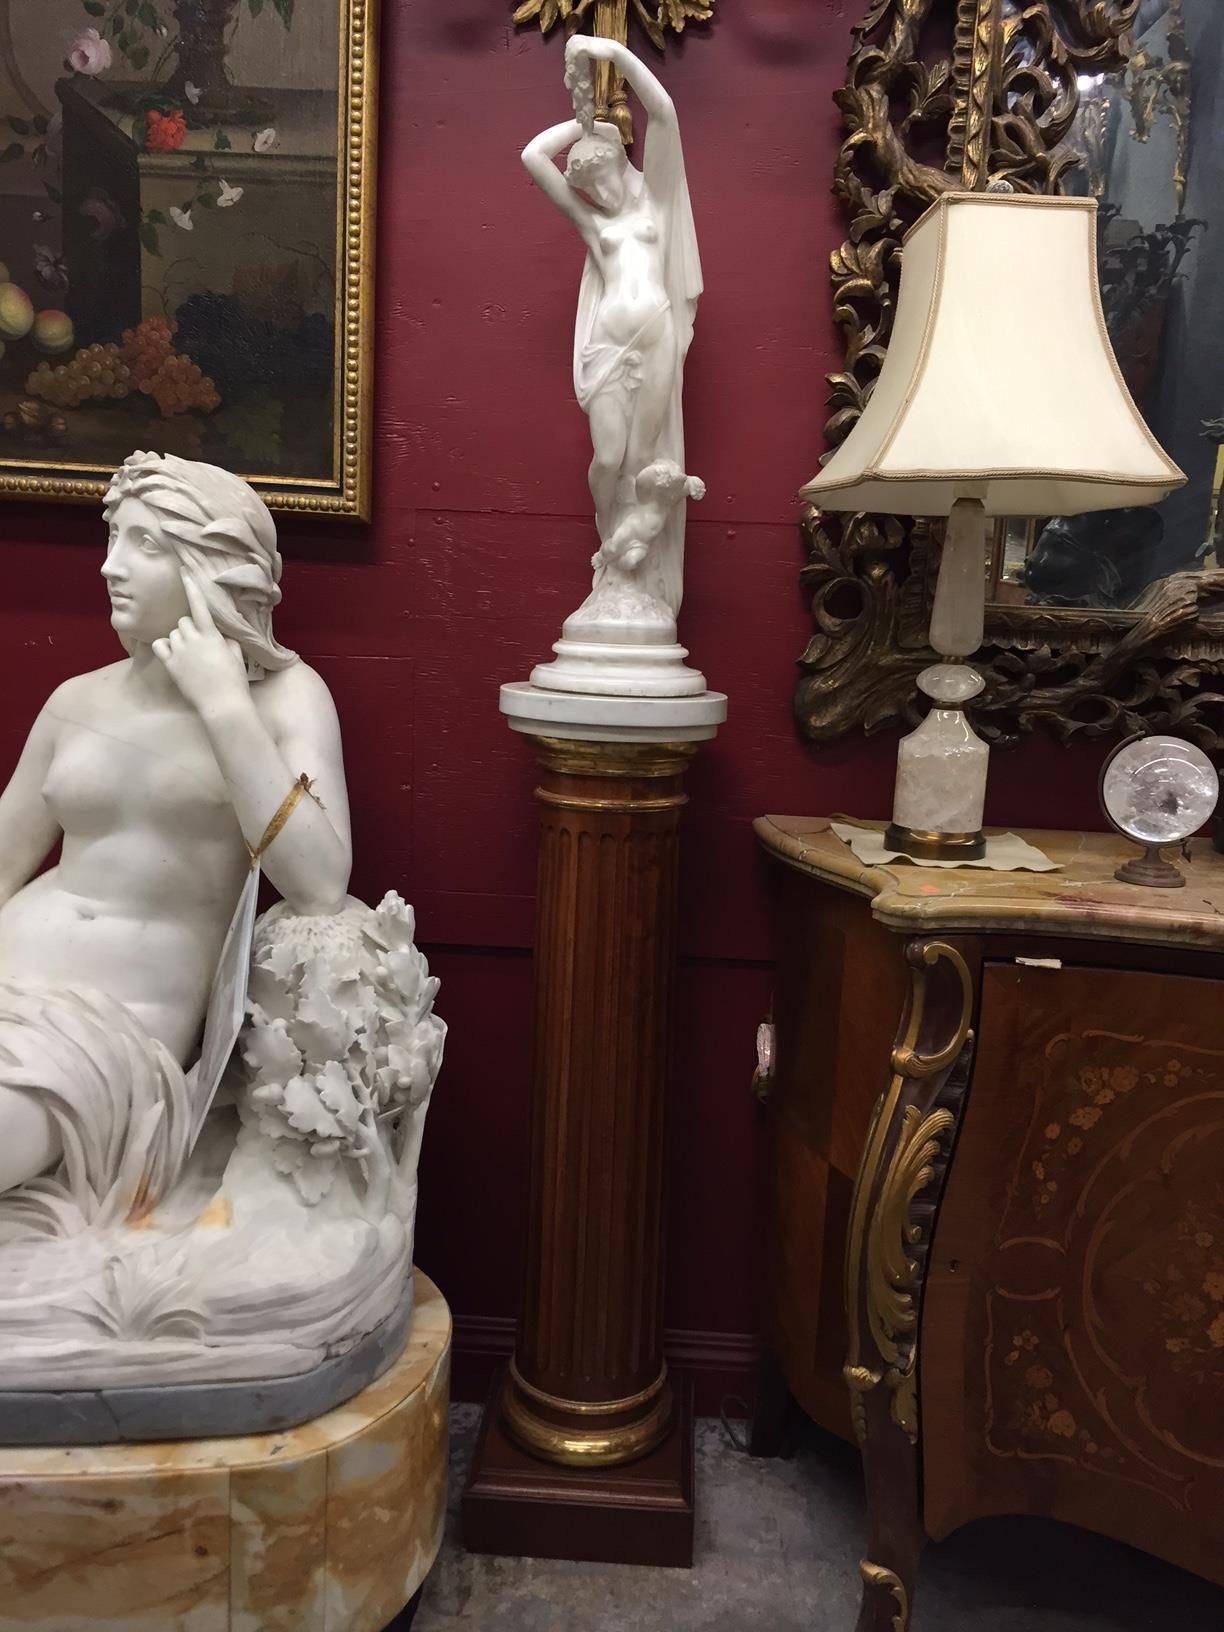 20th Century Pair of French Marble Figures on Pedestals, Nyx and Hemera